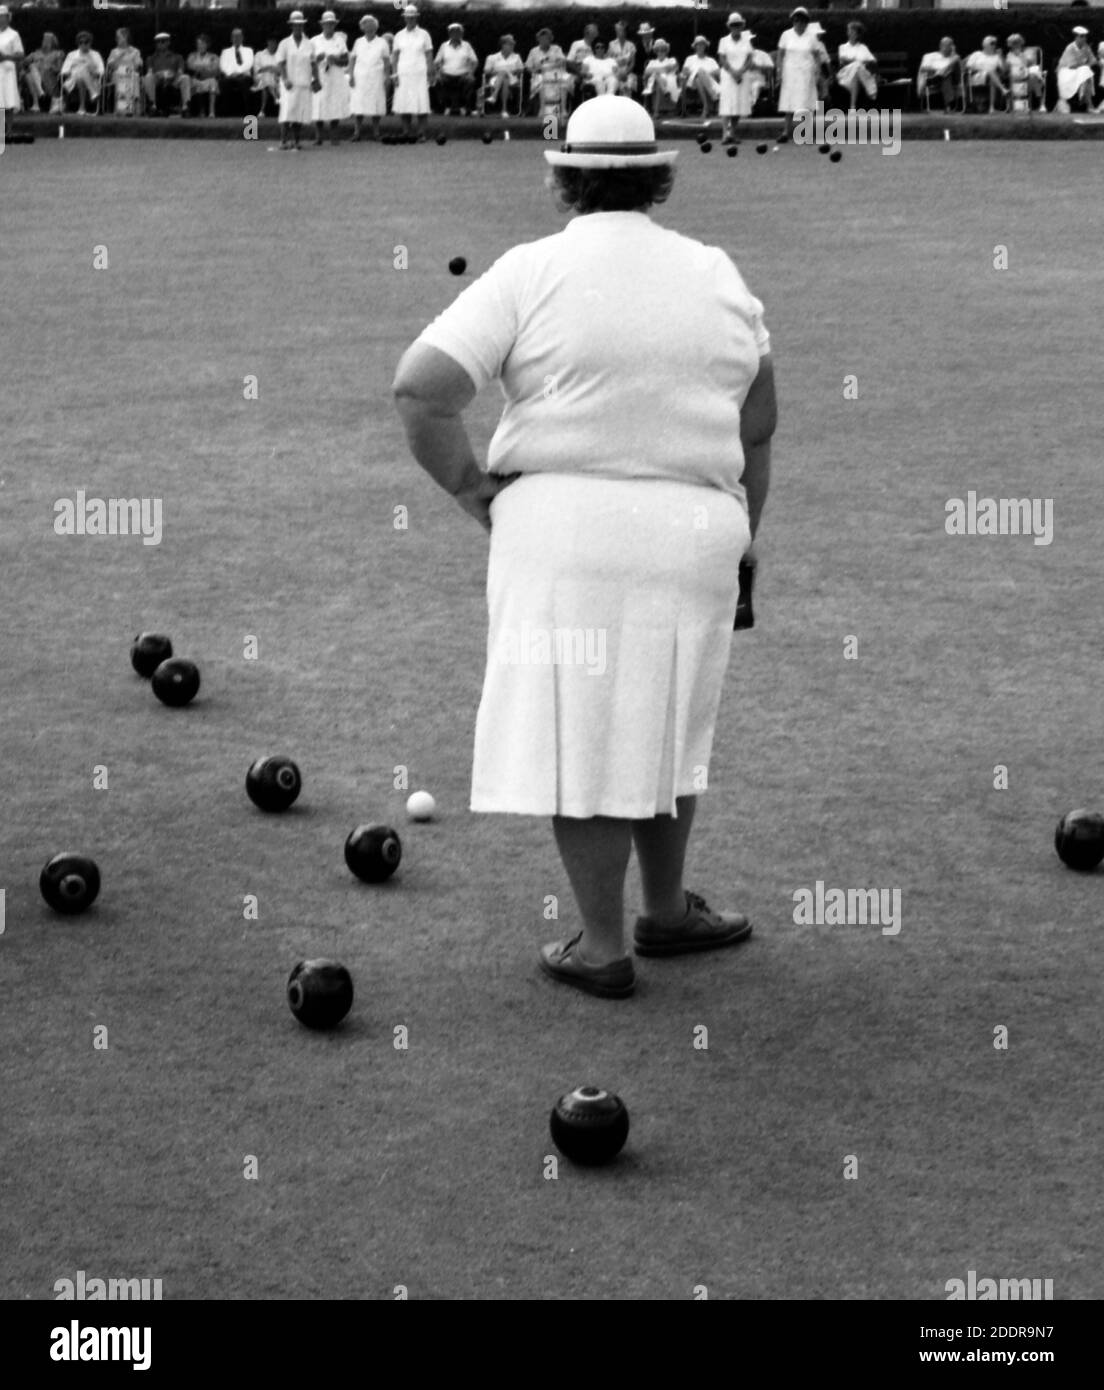 Bowls sport Black and White Stock Photos & Images - Alamy